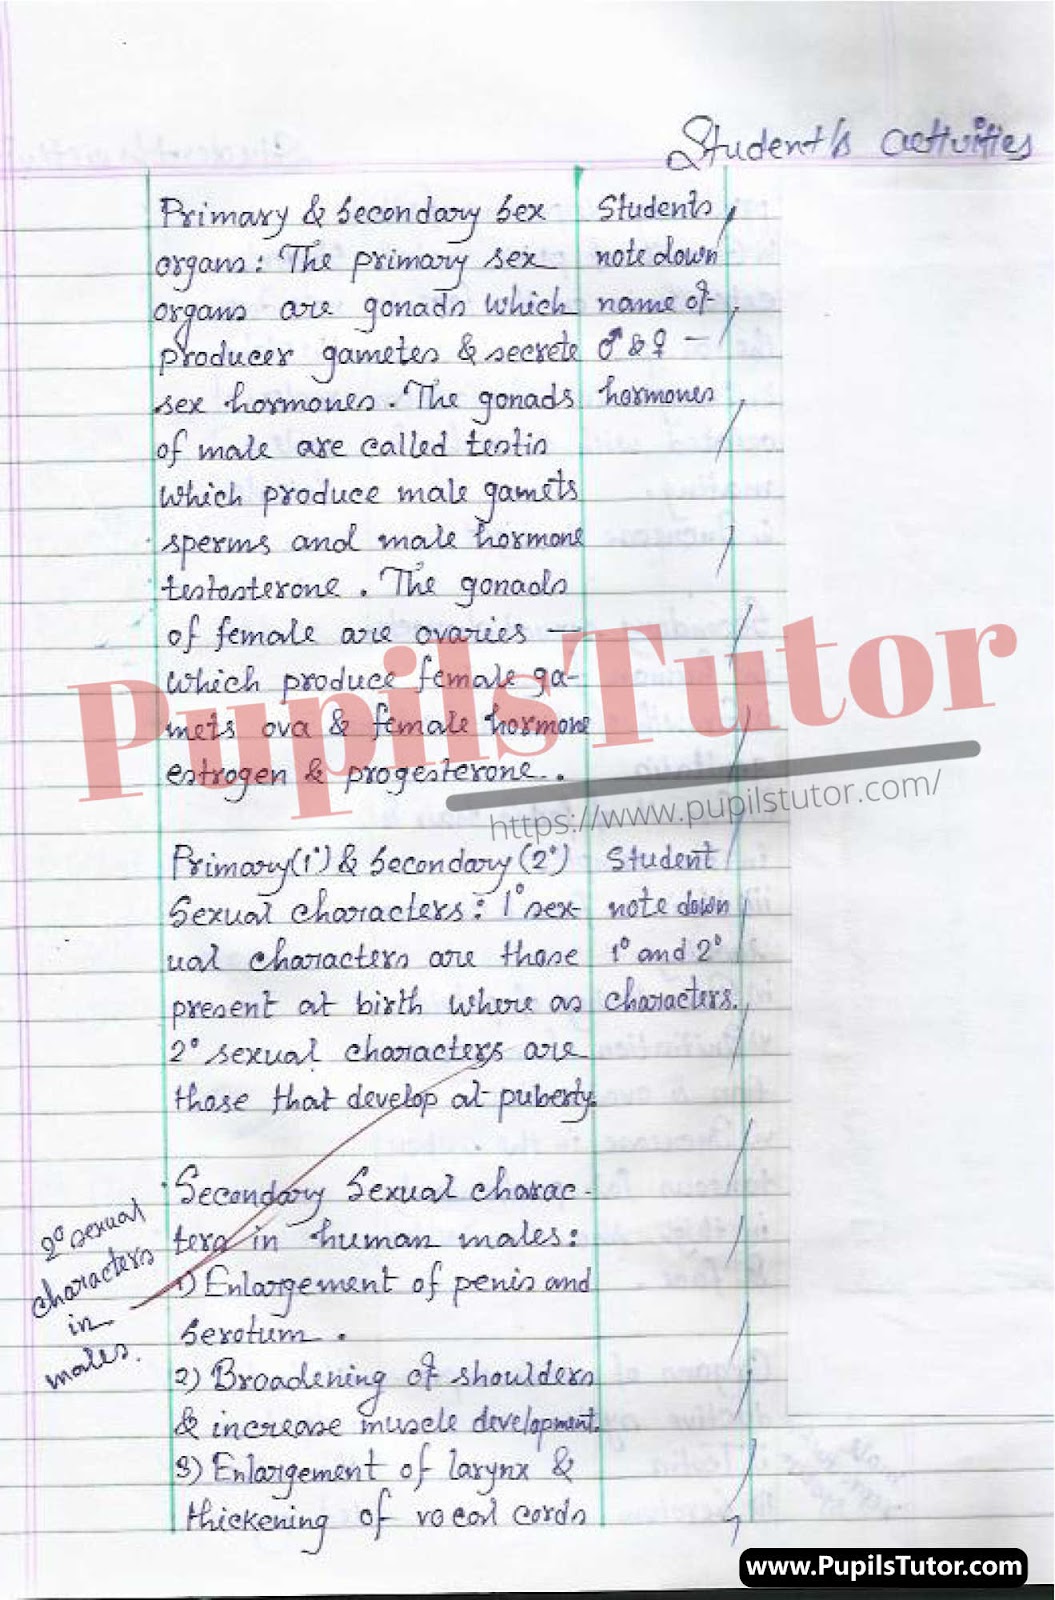 Class/Grade 11 Life Science Lesson Plan On Reproductive System For CBSE NCERT KVS School And University College Teachers – (Page And Image Number 3) – www.pupilstutor.com